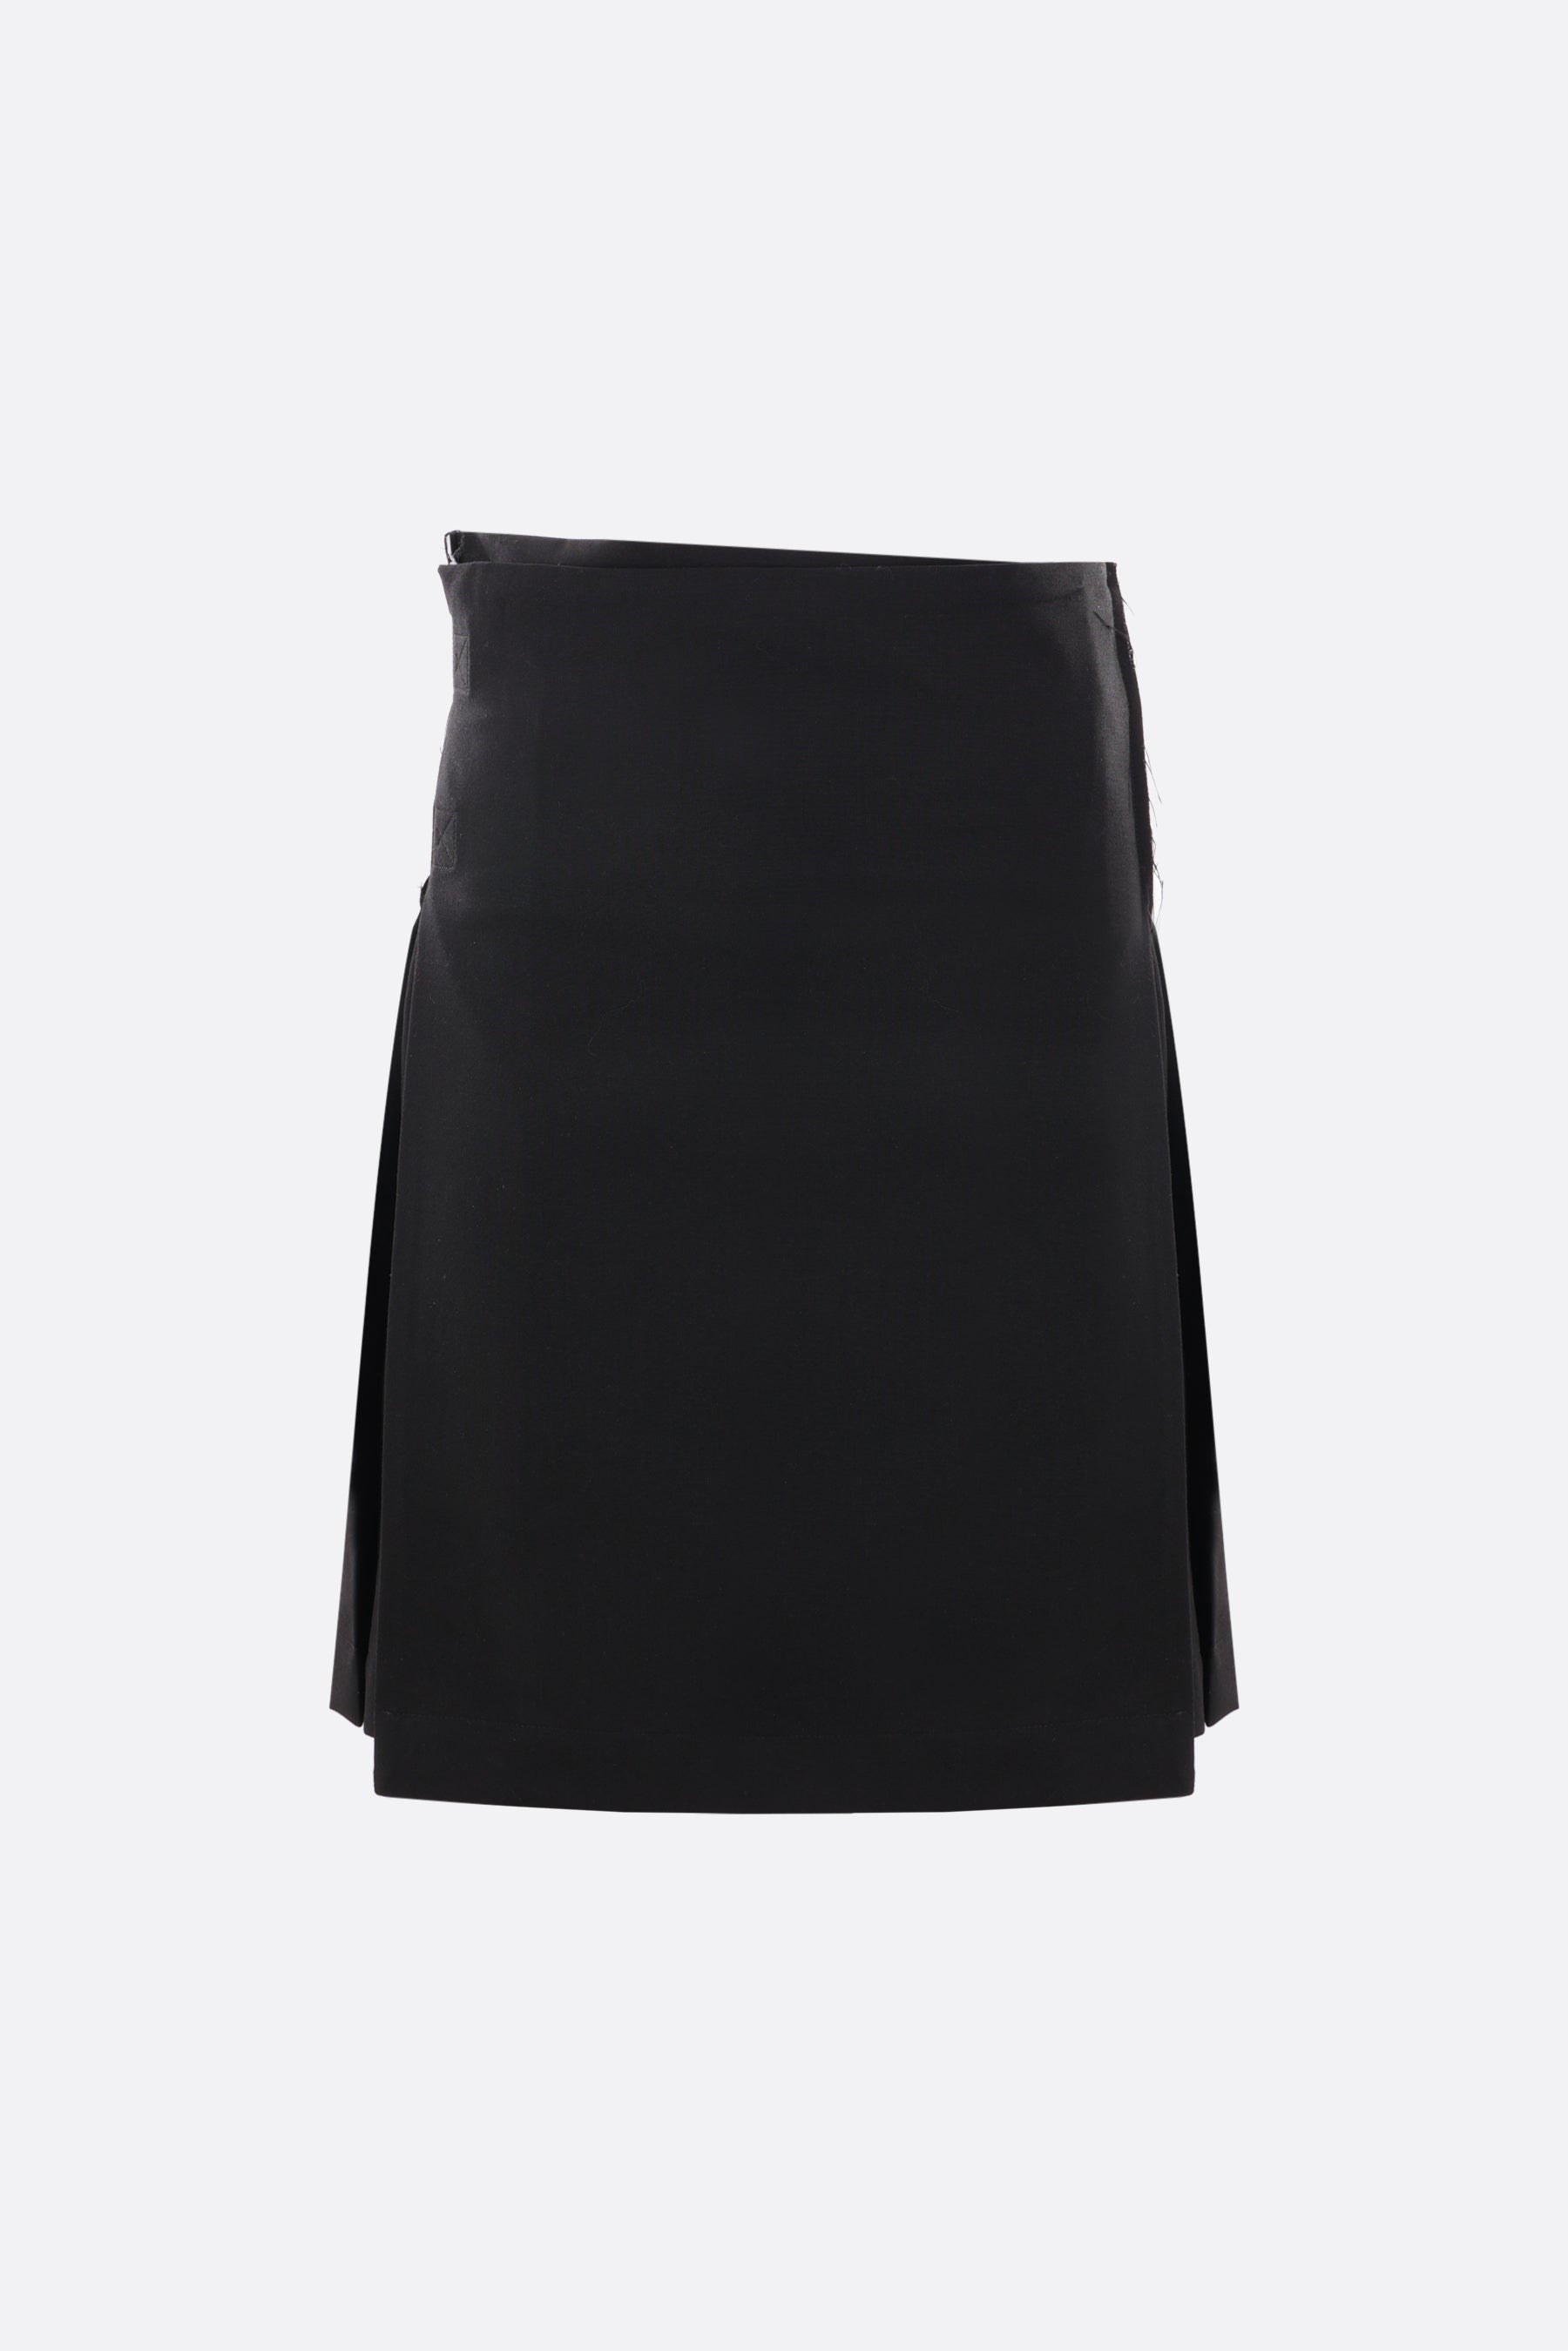 Cut Classic Kilt skirt in pleated wool and cotton